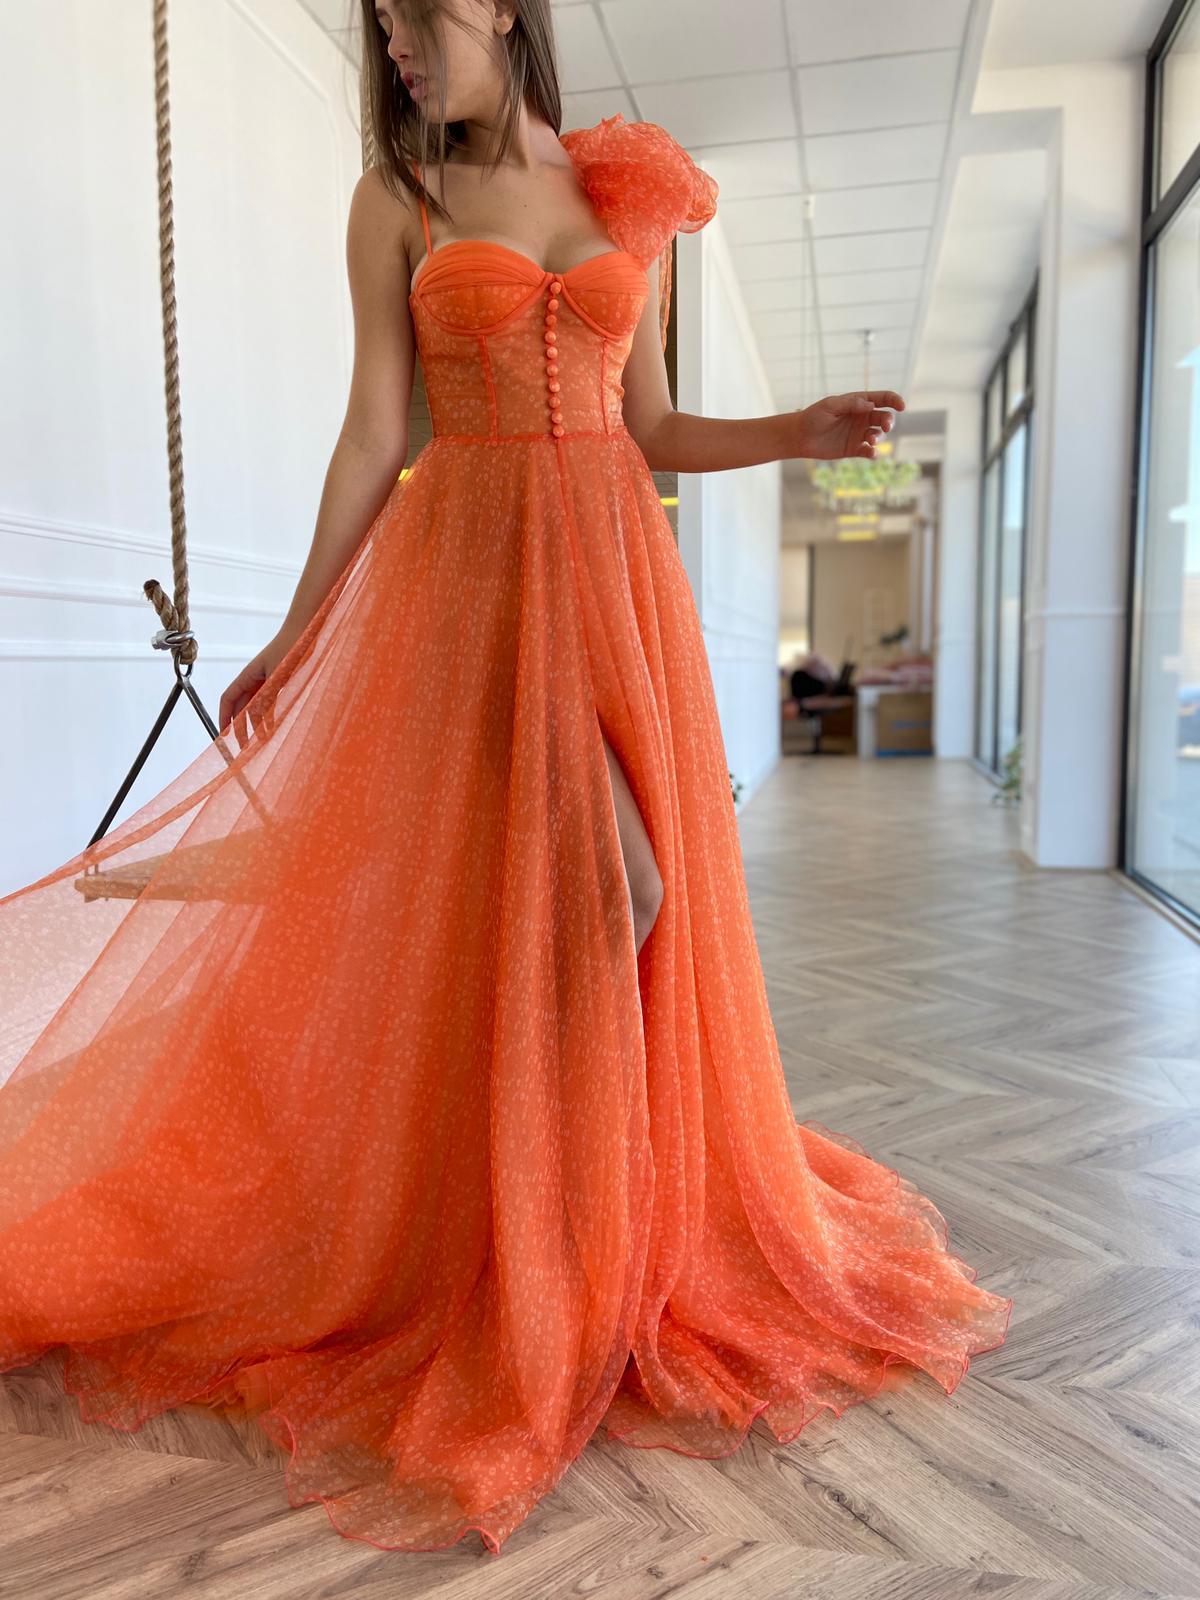 Orange A-Line dress with spaghetti straps and one shoulder sleeve